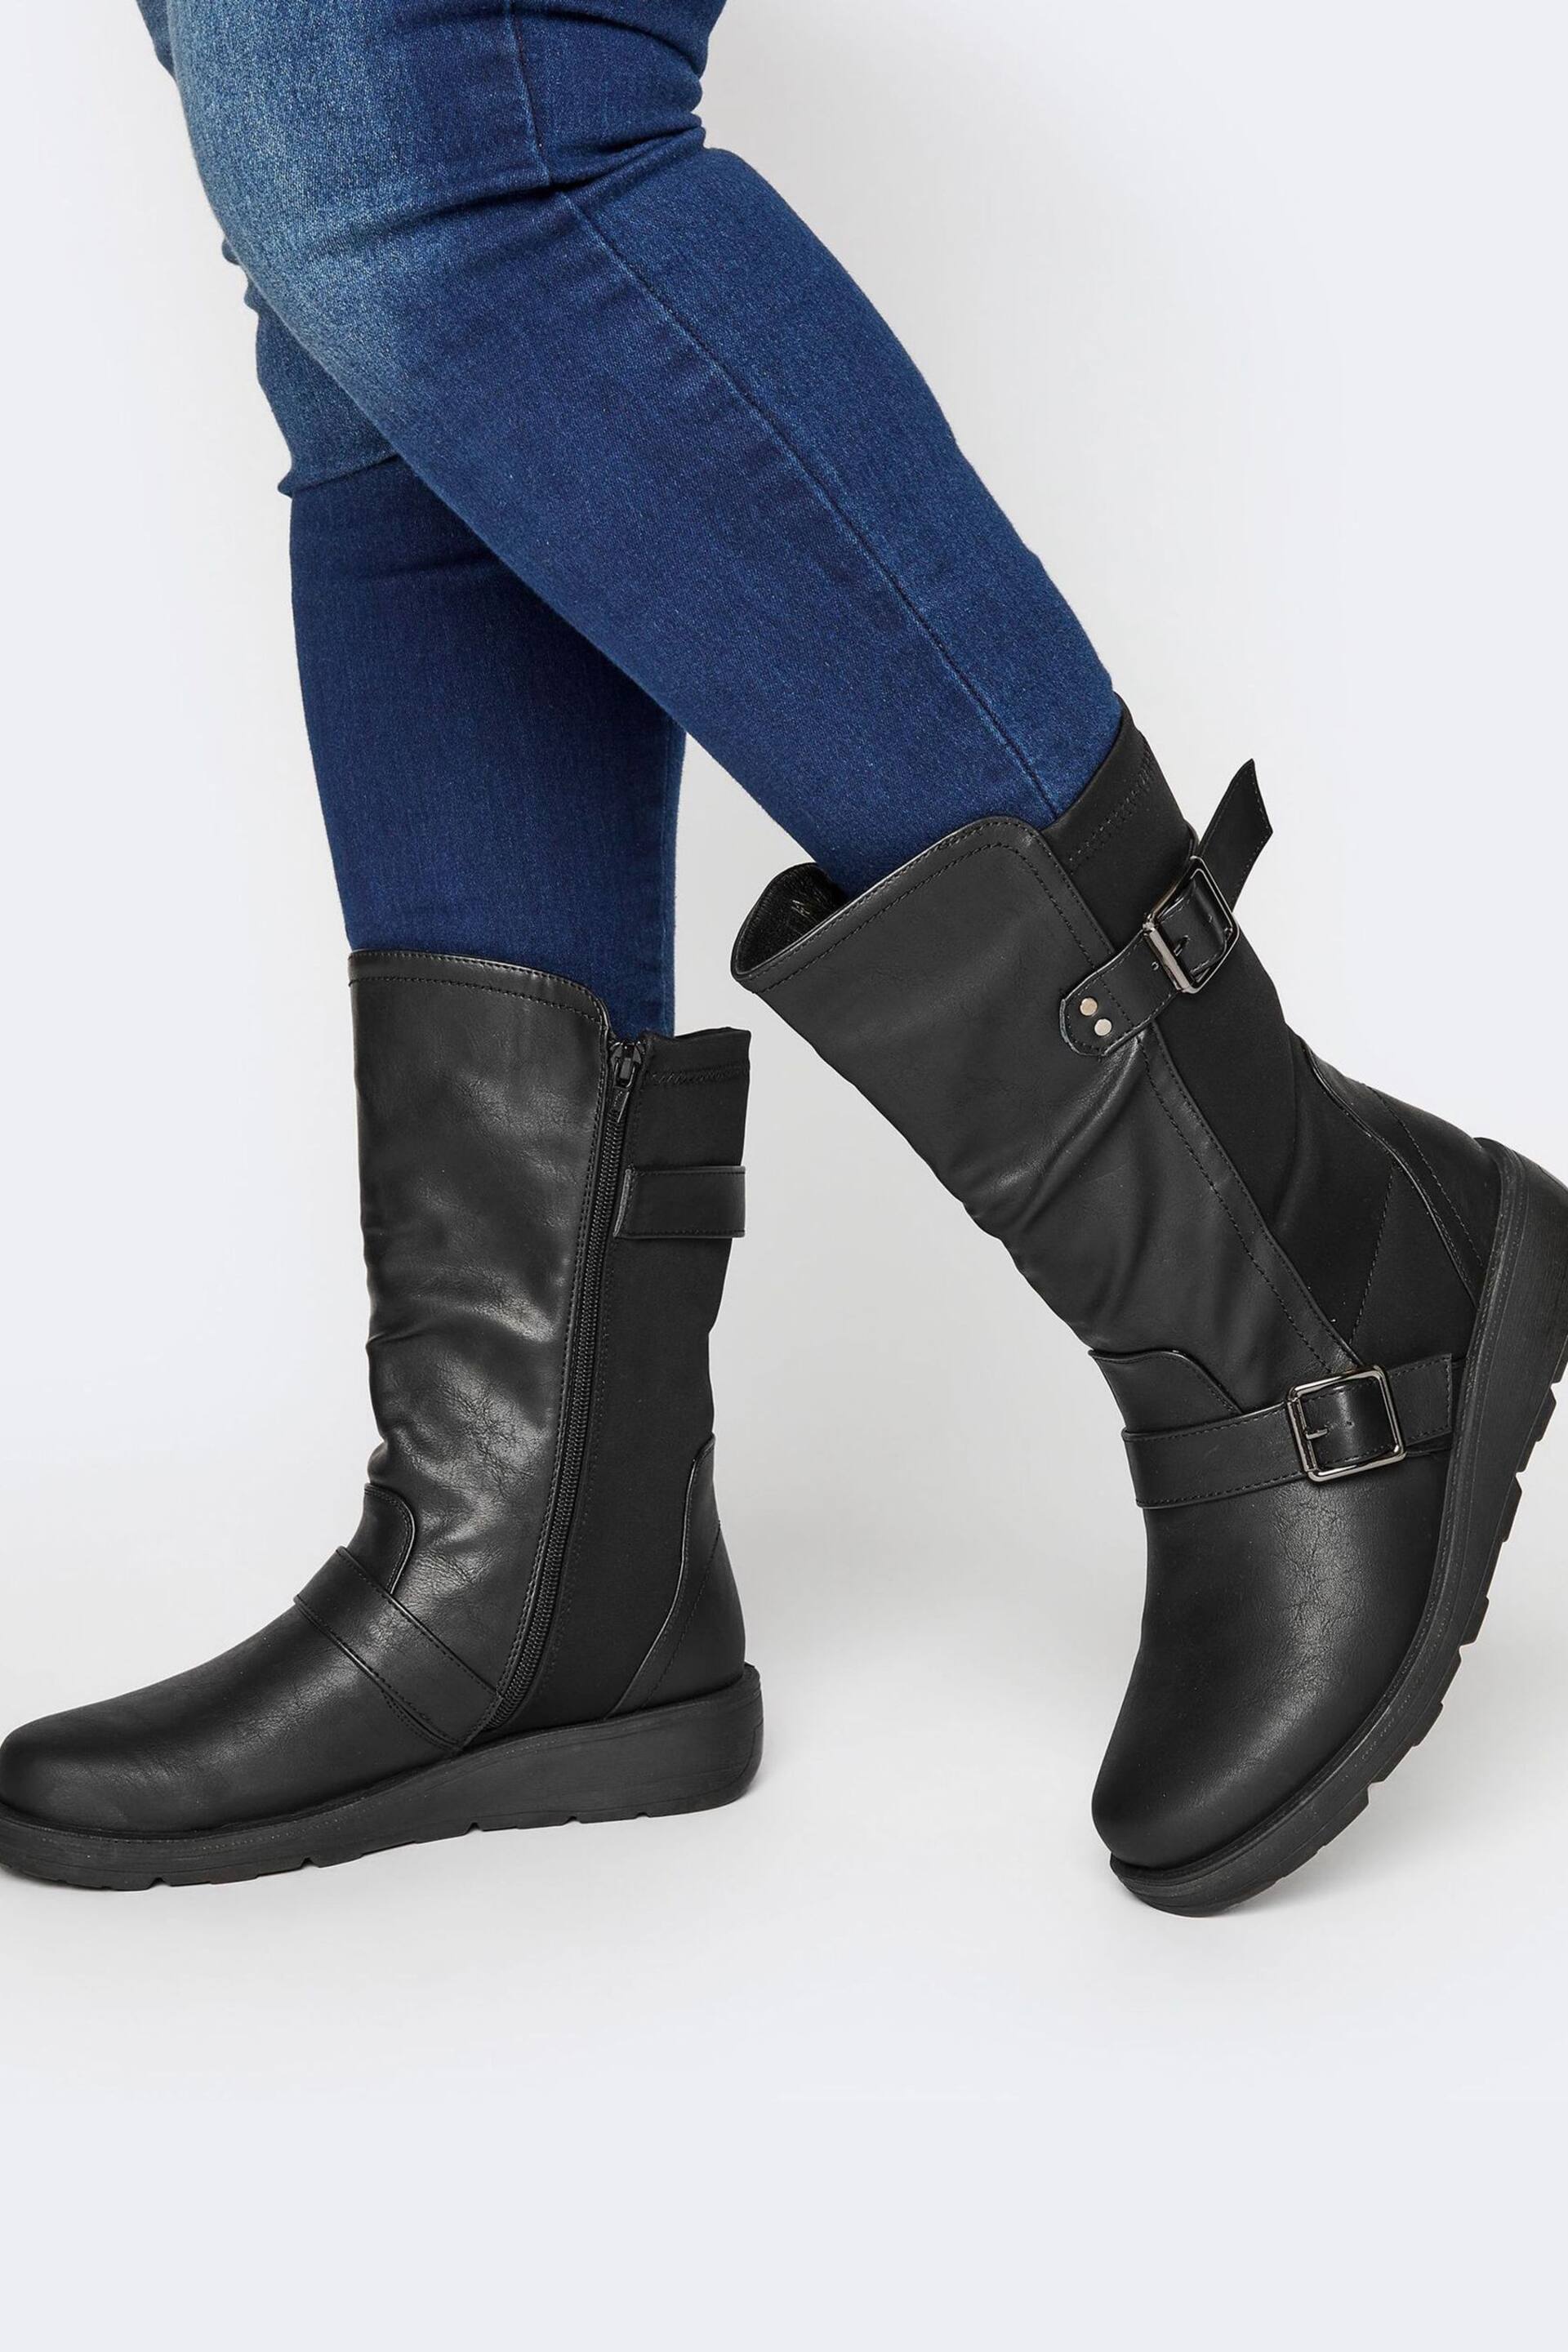 Yours Curve Black Wide Fit Low Wedge Buckle Boots - Image 5 of 5